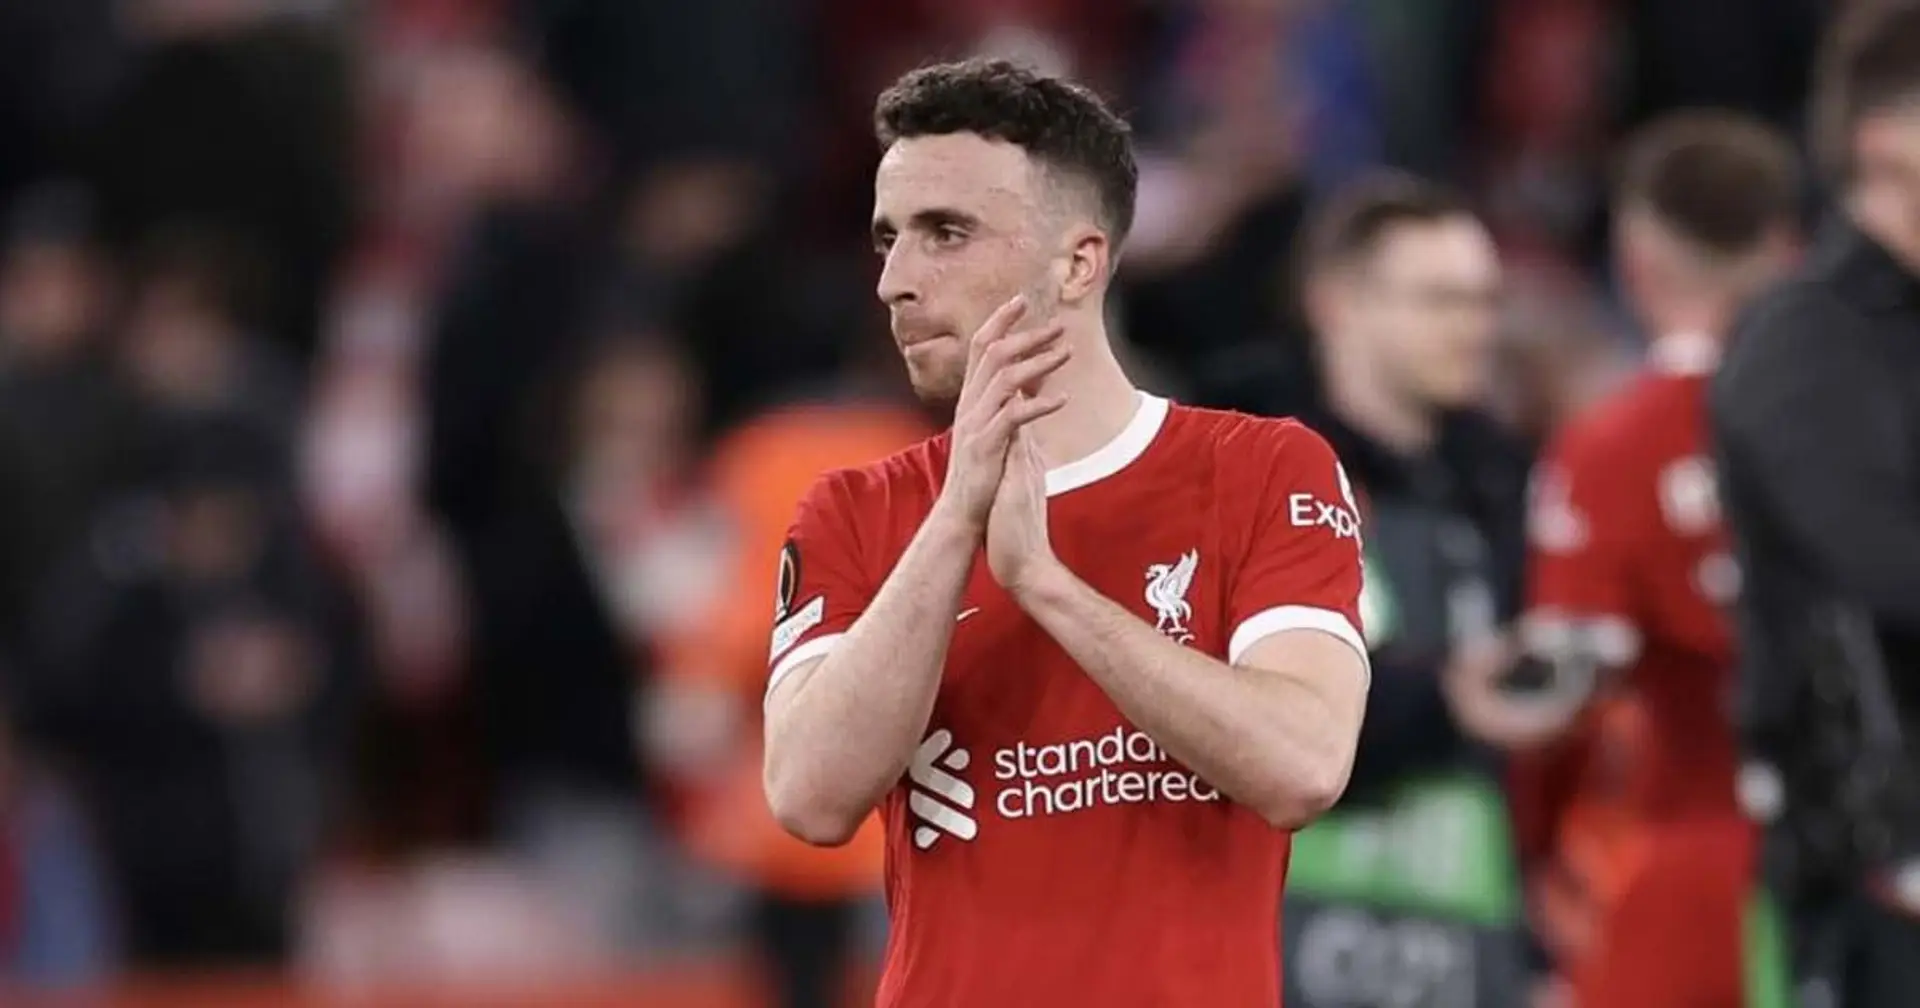 Why Diogo Jota was left out of Liverpool XI vs Atalanta — explained